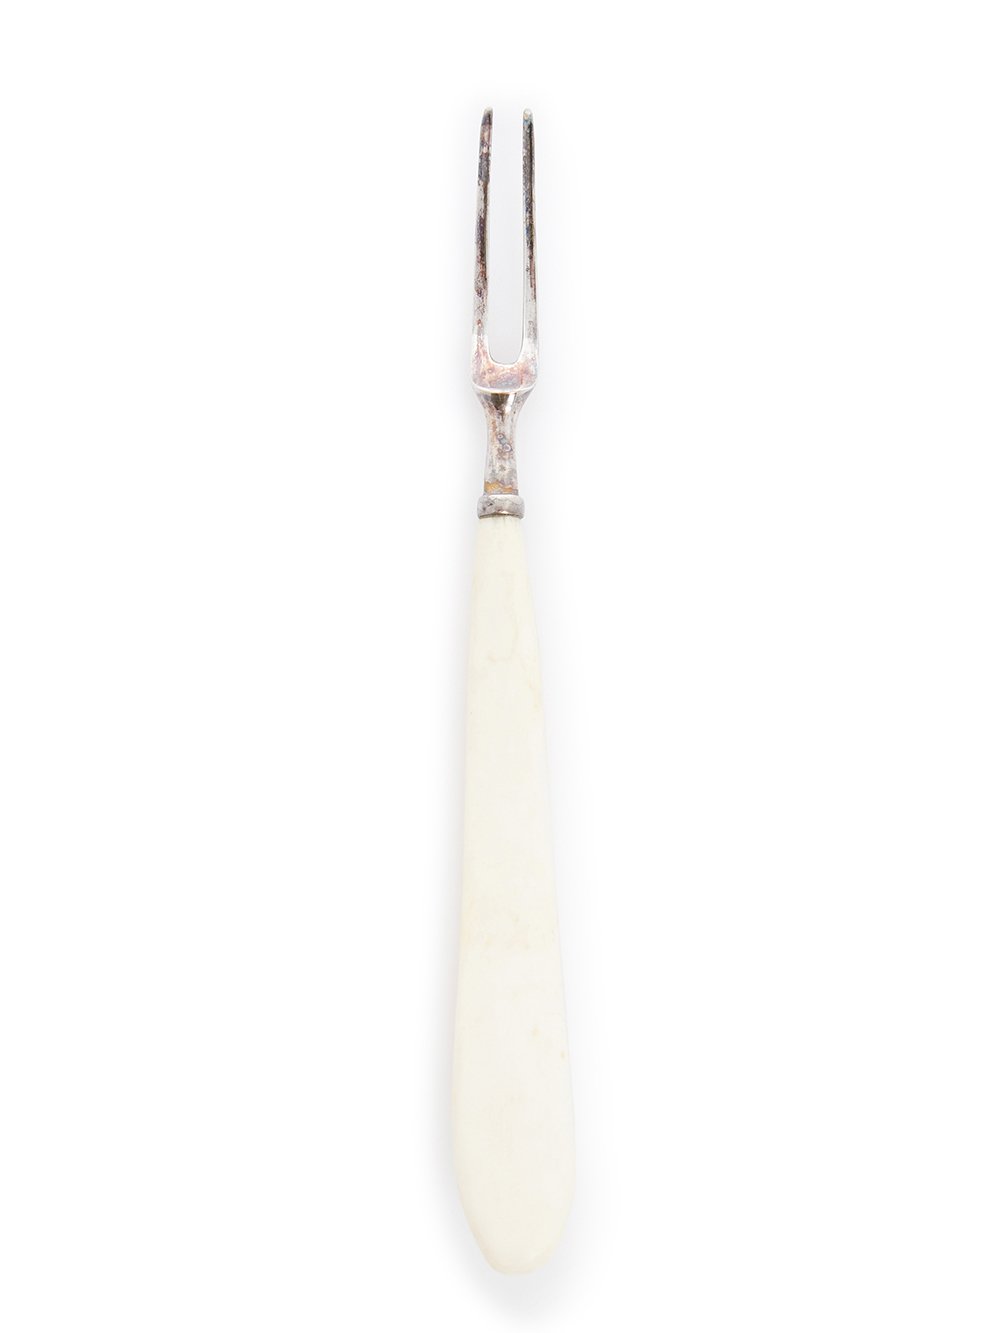 RICK OWENS SNAIL FORK FEATURES A SMALL TWO TINE STERLING TOP, AND A SLIM NATURAL COLOR BONE HANDLE.